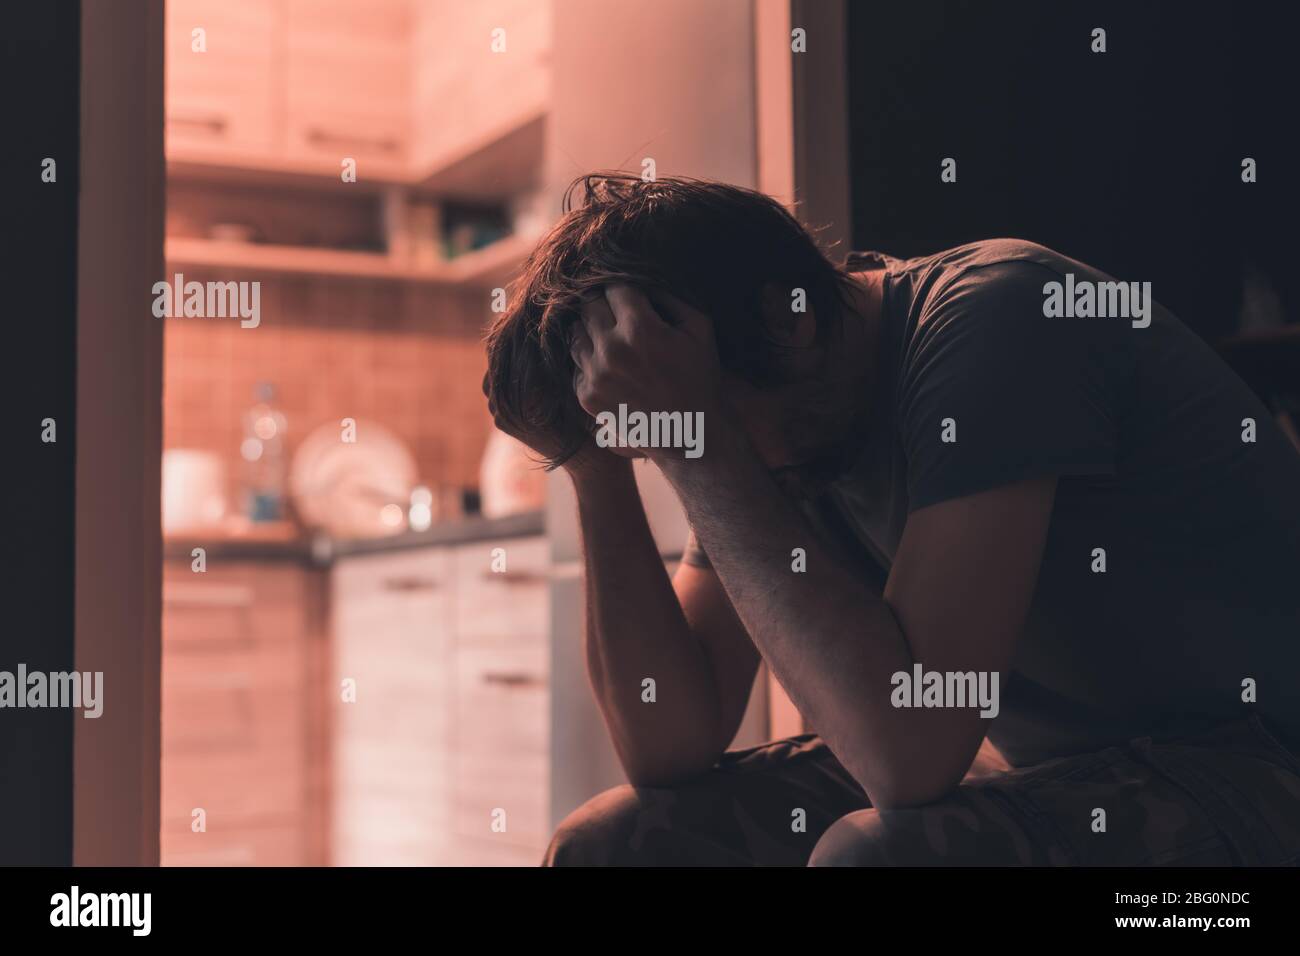 Depressed sad man crying in dark room with head in hands, selective focus Stock Photo